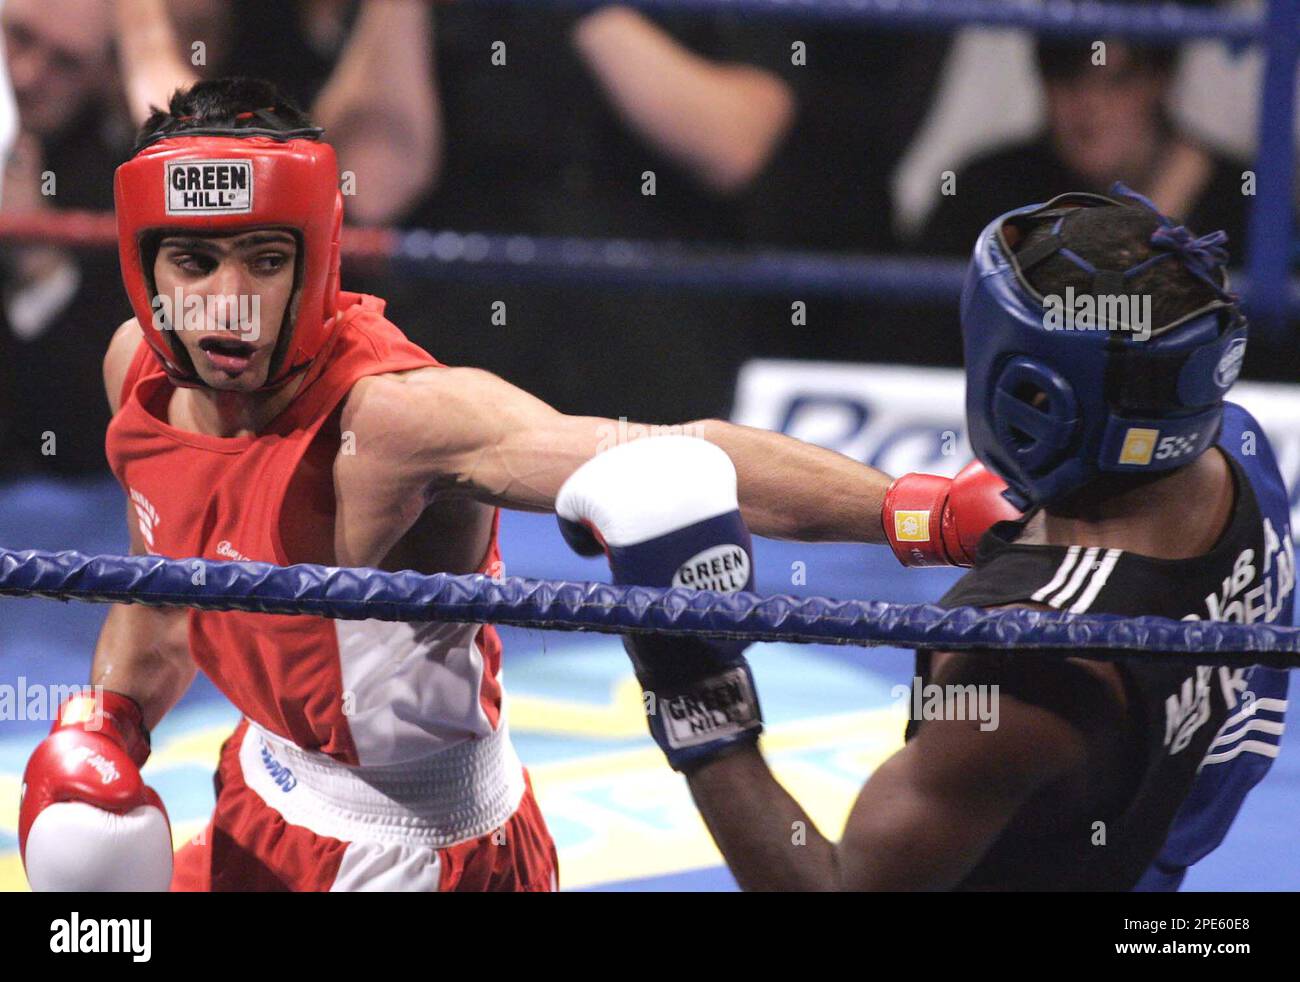 paridad Reciclar Comunismo England's Amir Khan, left, puts in a punch against Cuba's Mario Kindelan  during their lightweight boxing contest at the Reebok Stadium in Bolton,  England, Saturday, May. 14, 2005. Khan won the fight,